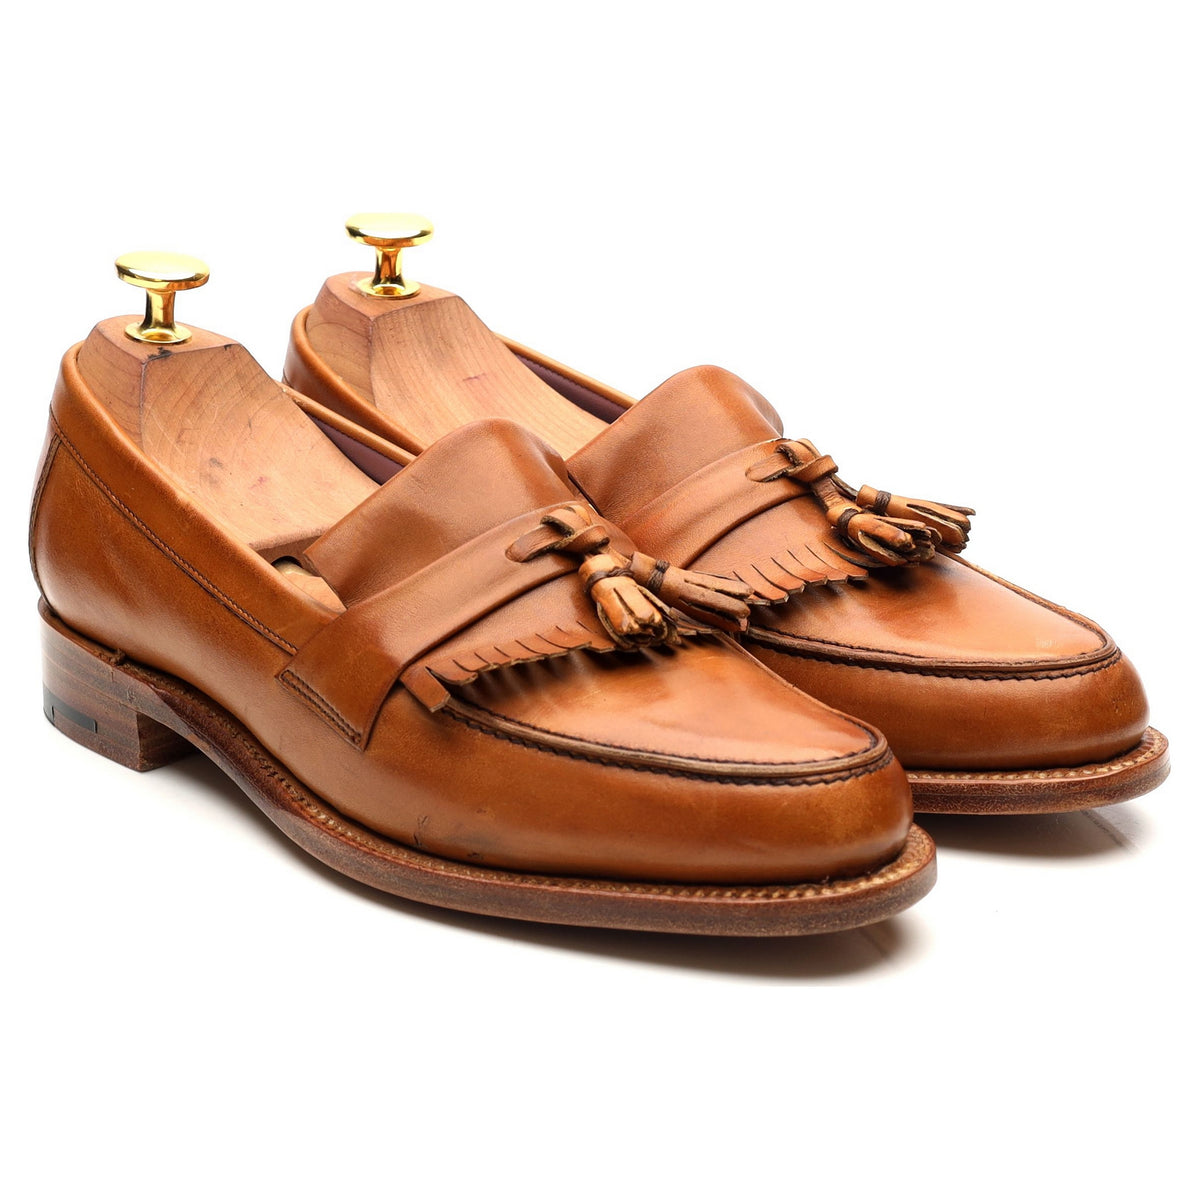 Women&#39;s &#39;Heather&#39; Tan Brown Leather Fringed Tassel Loafers UK 4.5 D